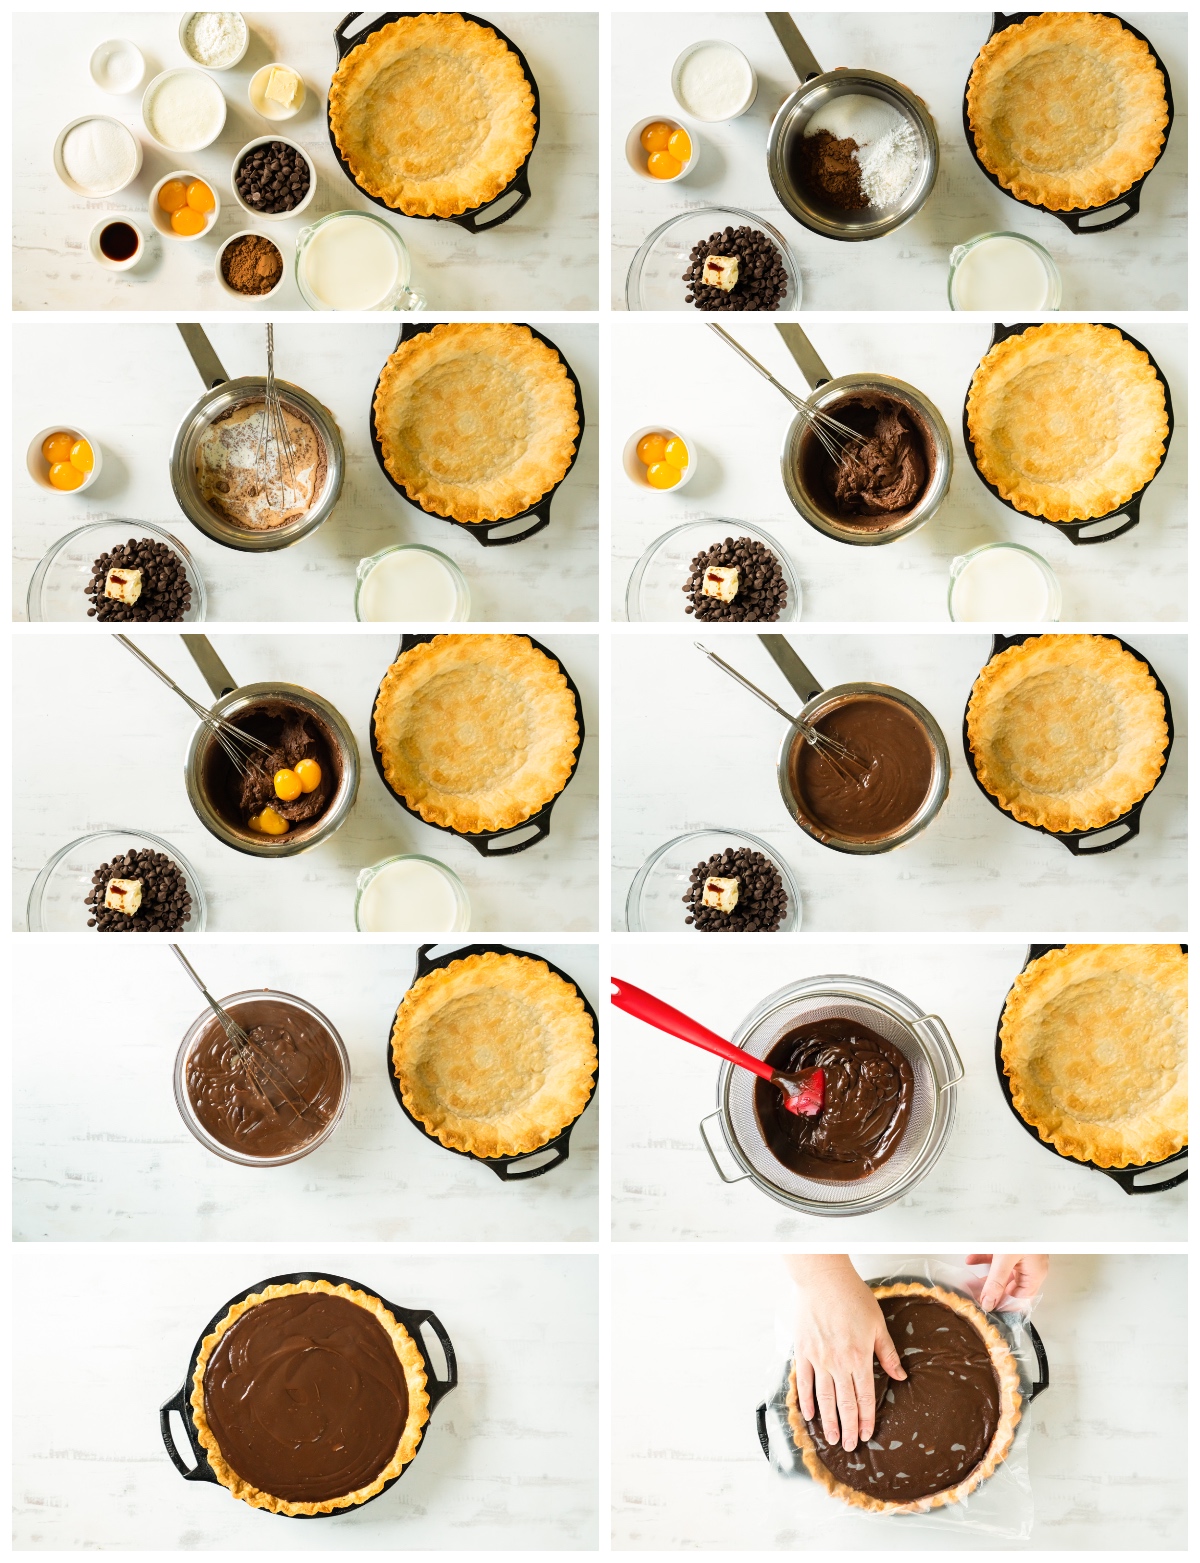 how to make chocolate cream pie step by step photo instructions